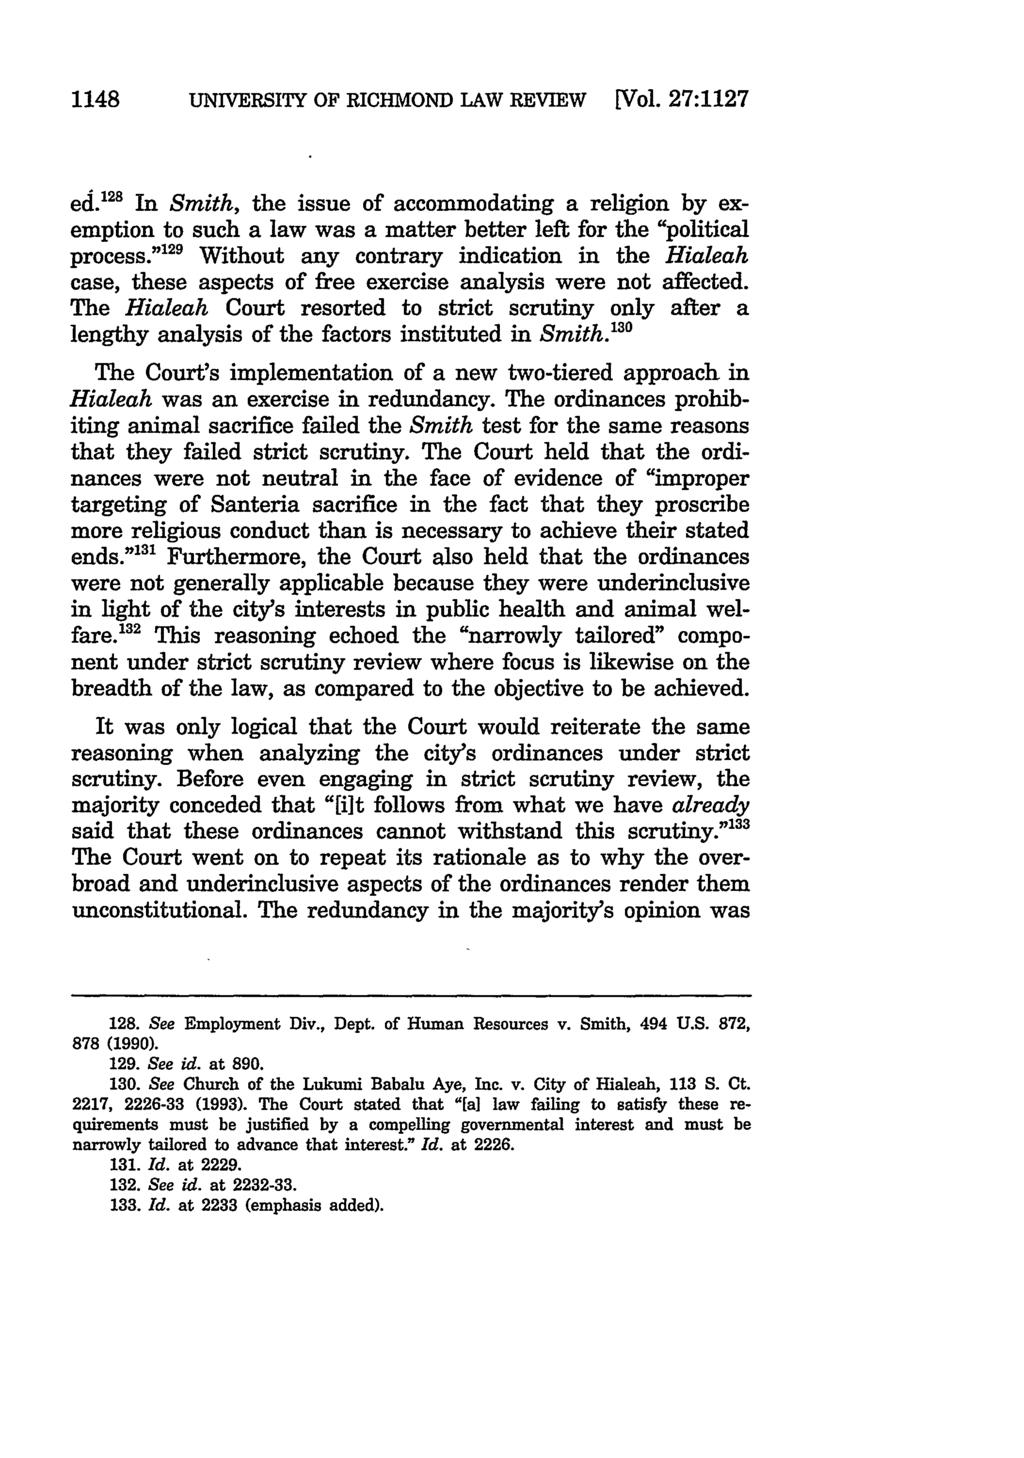 1148 UNIVERSITY OF RICHMOND LAW REVIEW [Vol. 27:1127 ed. 12 1 In Smith, the issue of accommodating a religion by exemption to such a law was a matter better left for the "political process.